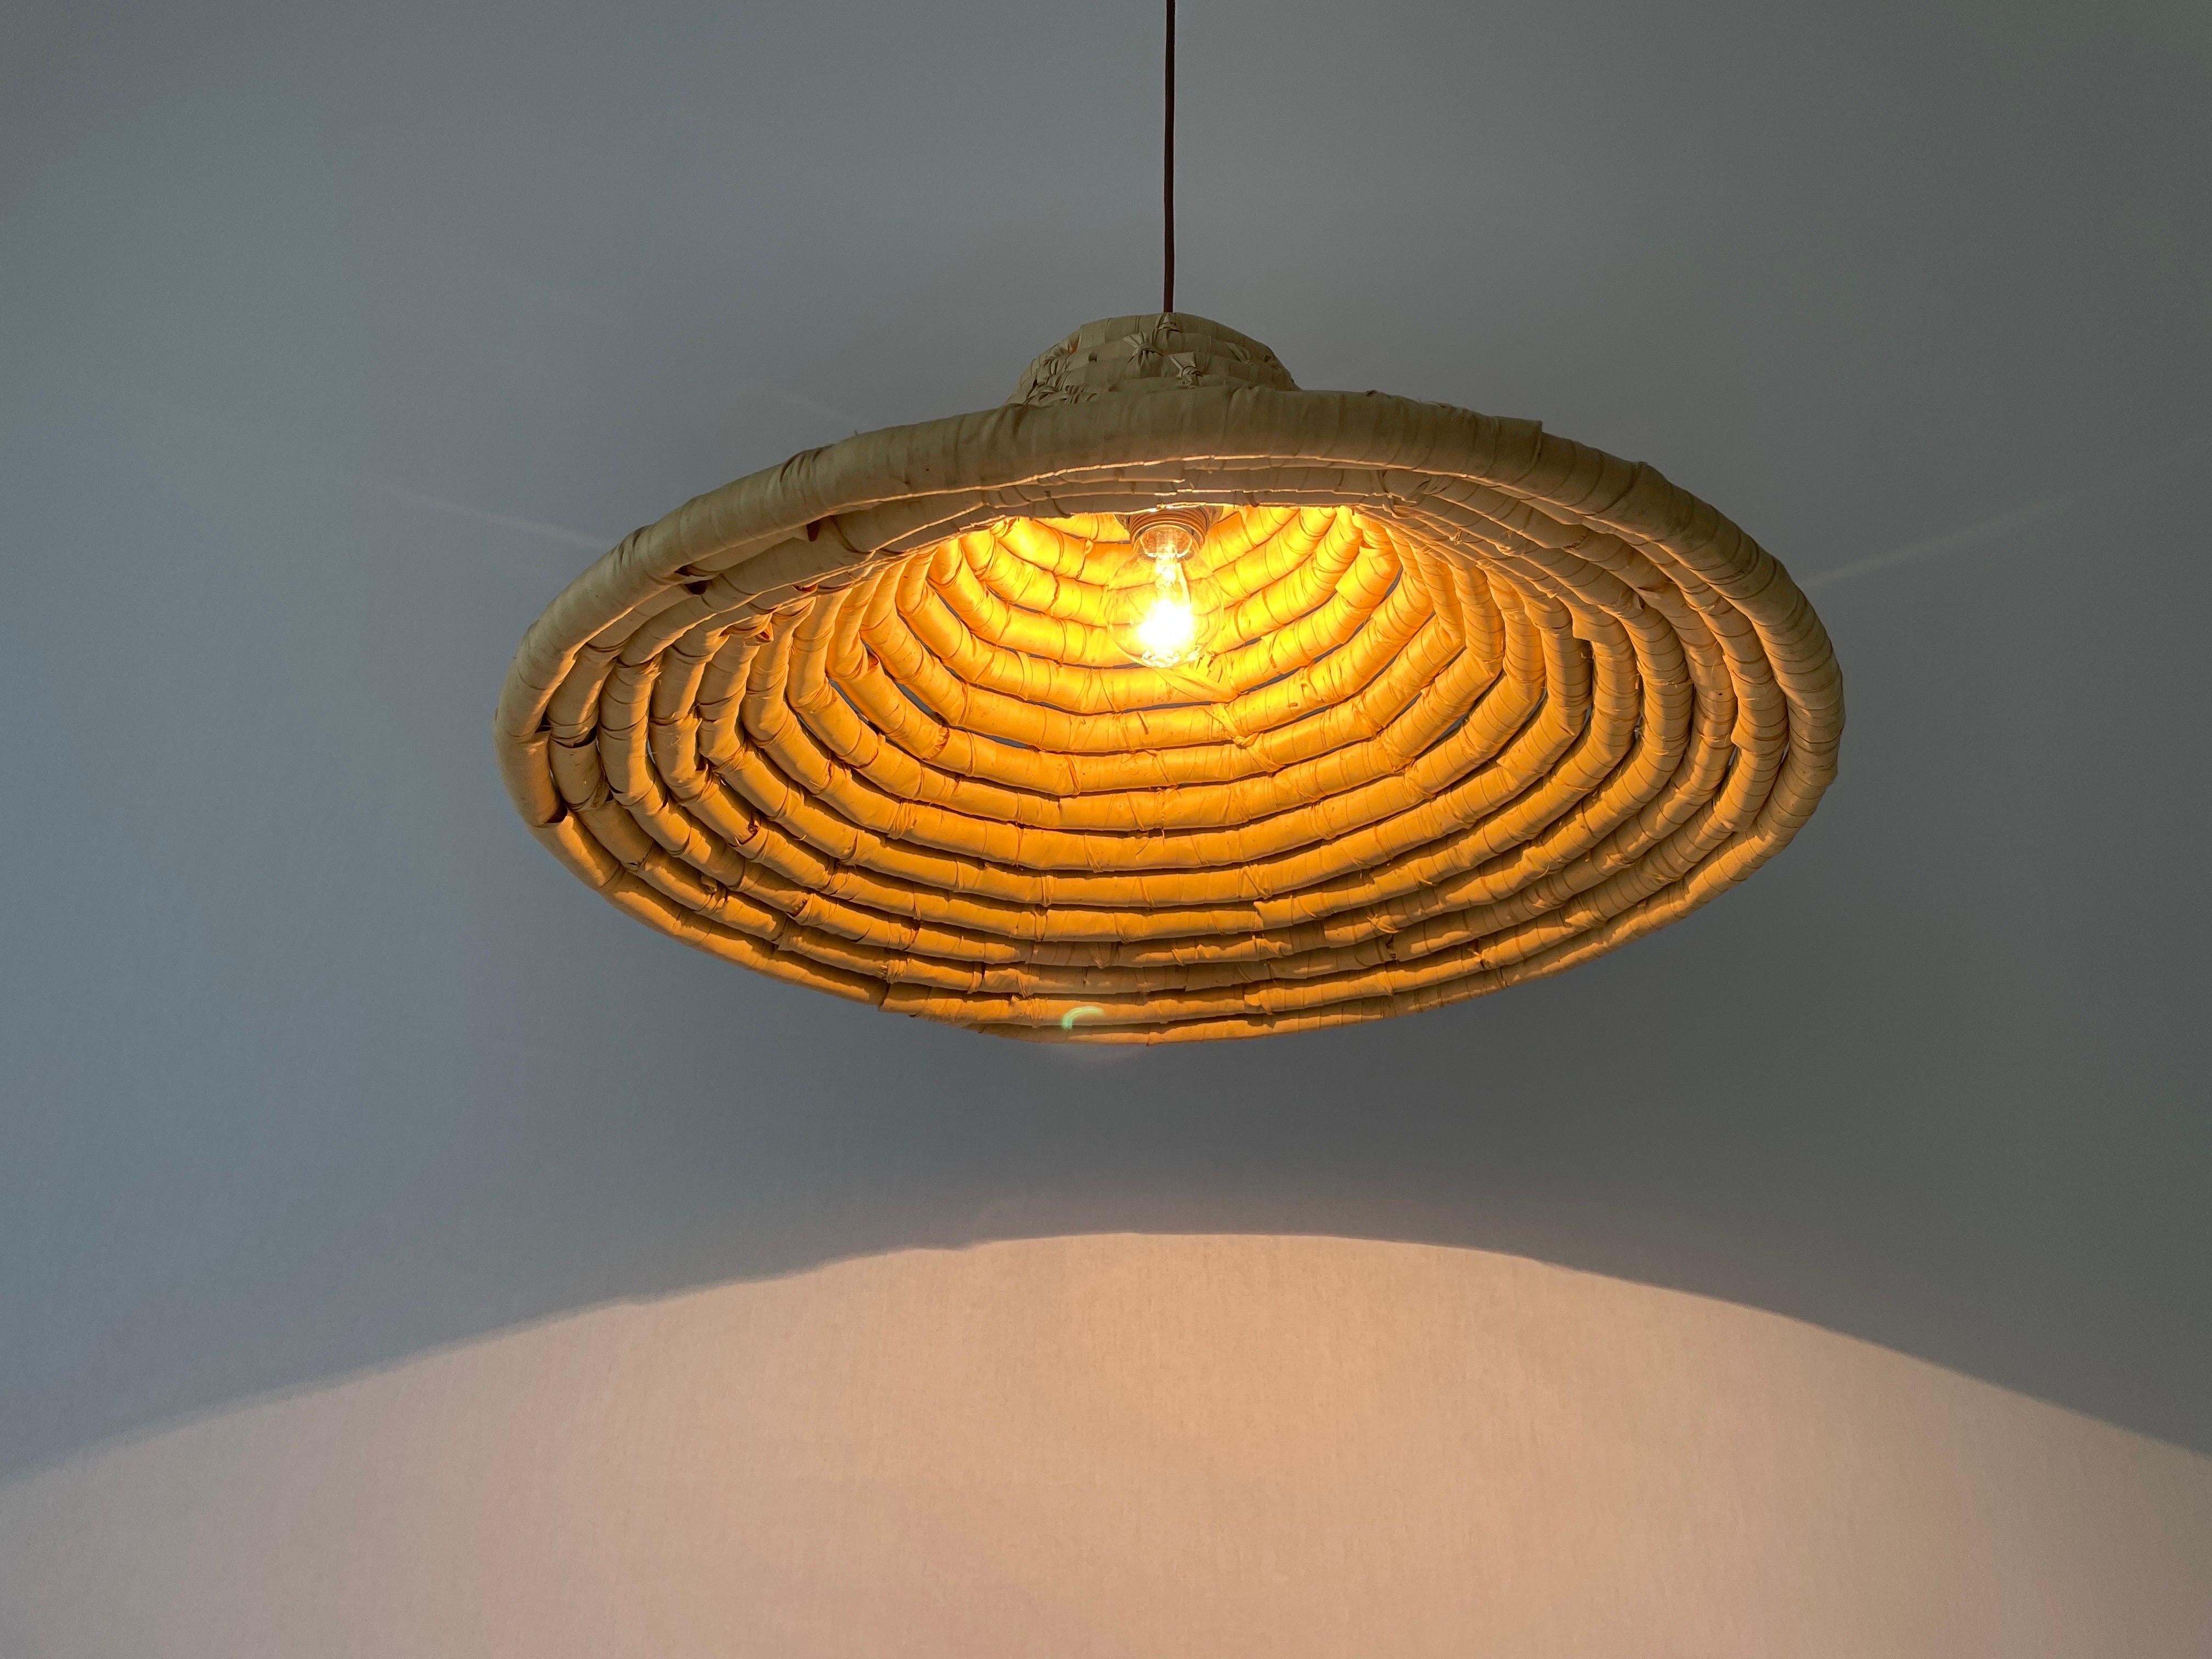 Unusual Large Made of Natural Plant Material Pendant Lamp, 1960s, Germany For Sale 9